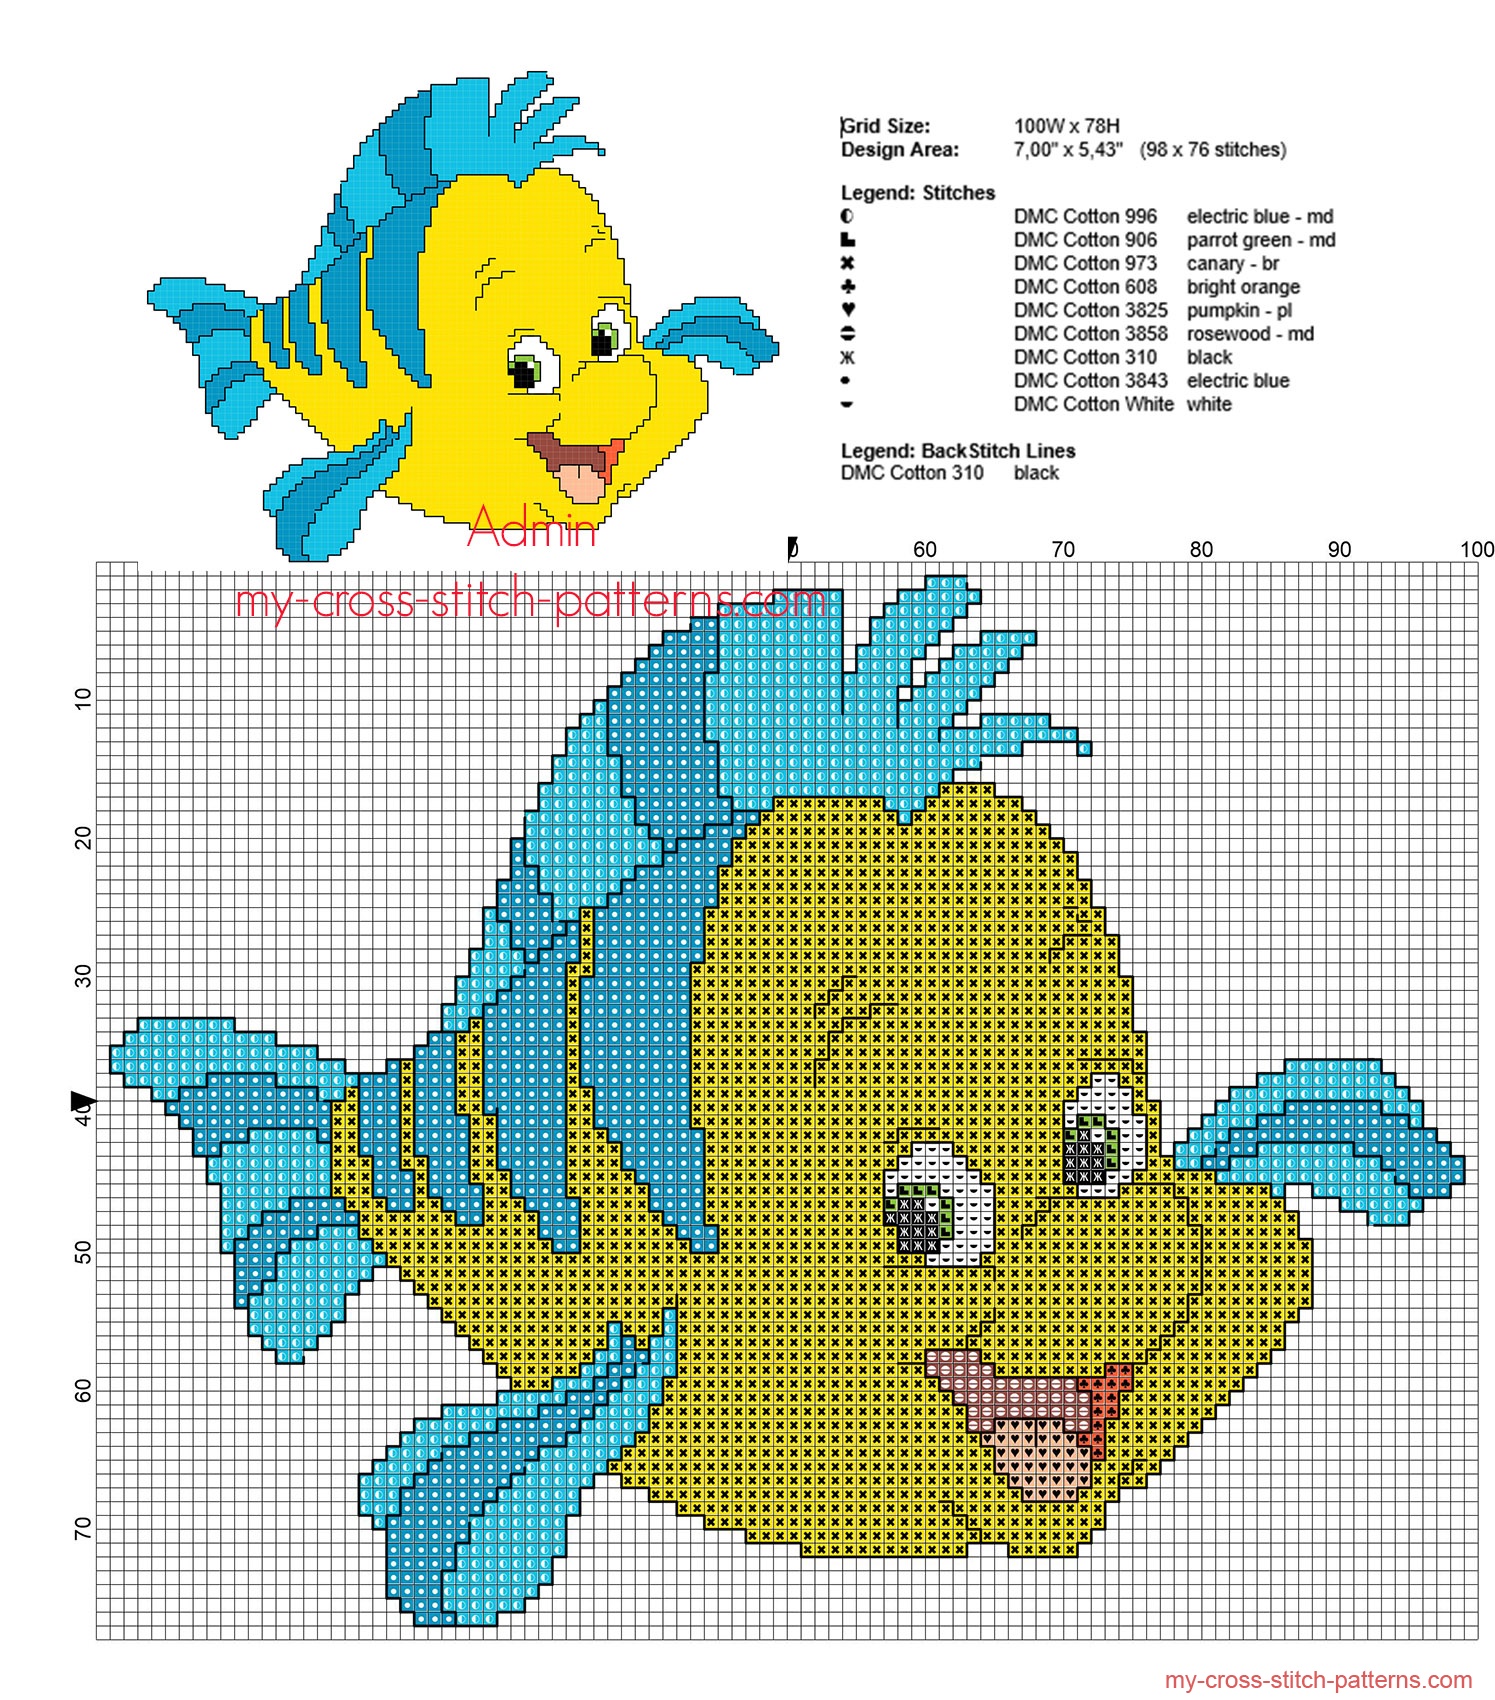 flounder_from_disney_the_little_mermaid_cross_stitch_pattern_with_back_stitch_use